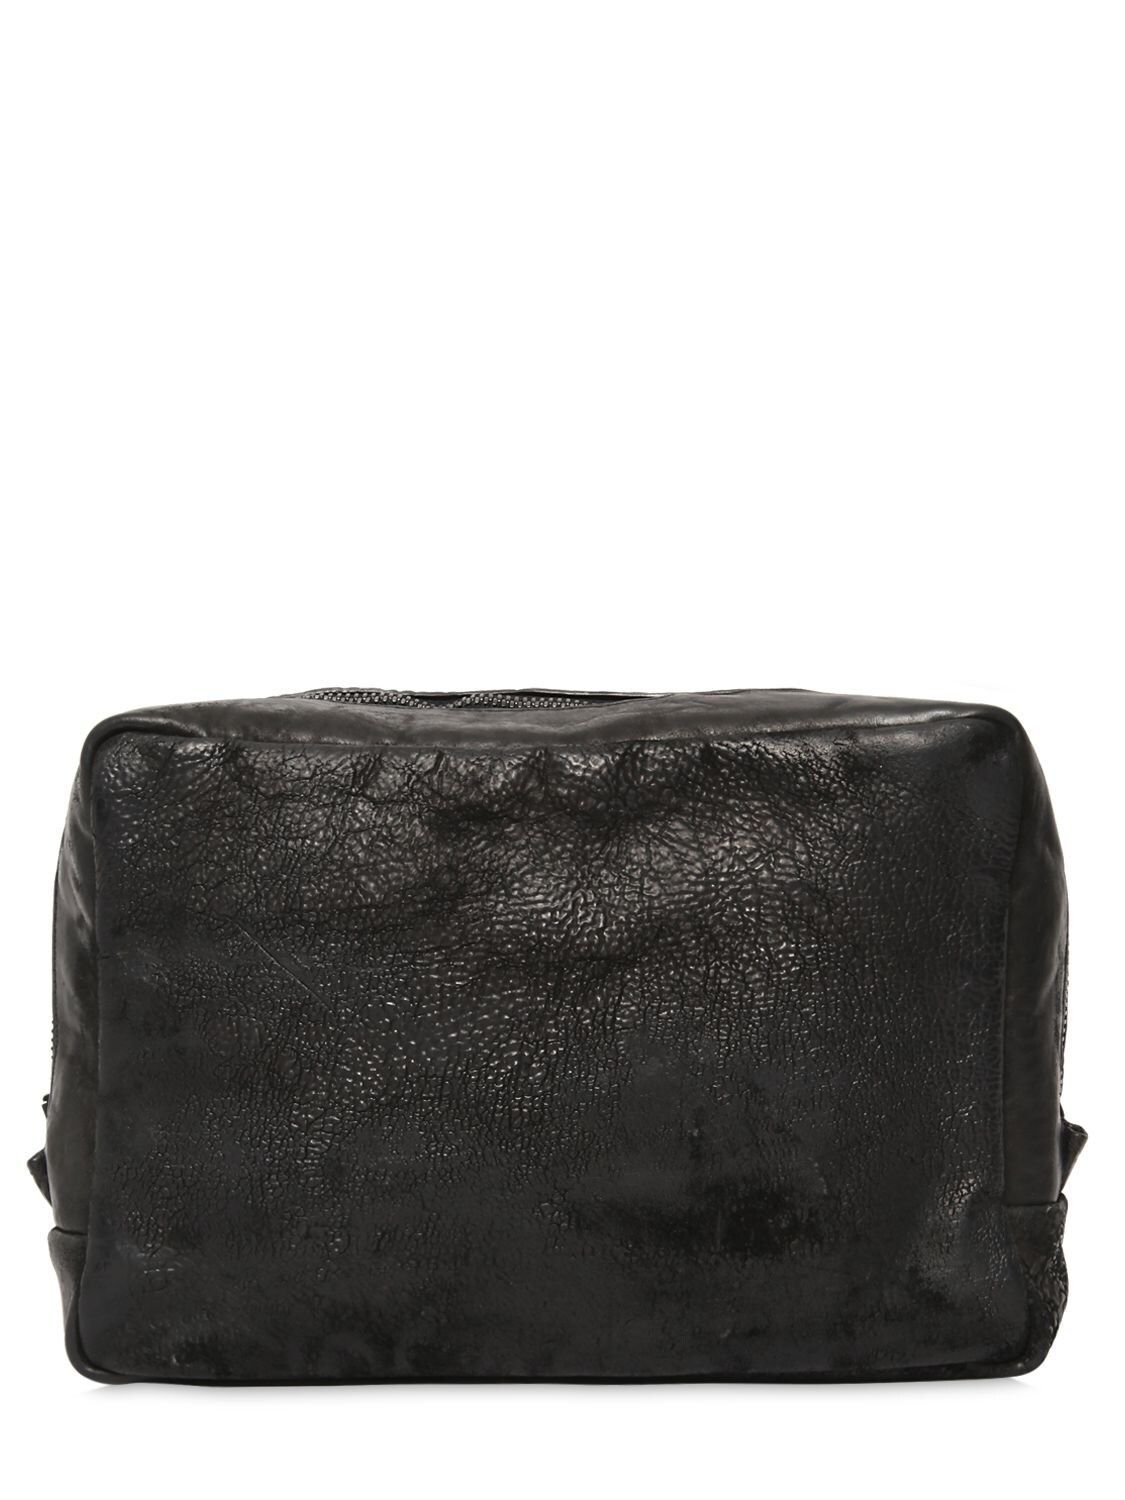 The Last Conspiracy Zip Around Embossed Leather Toiletry Bag In Black